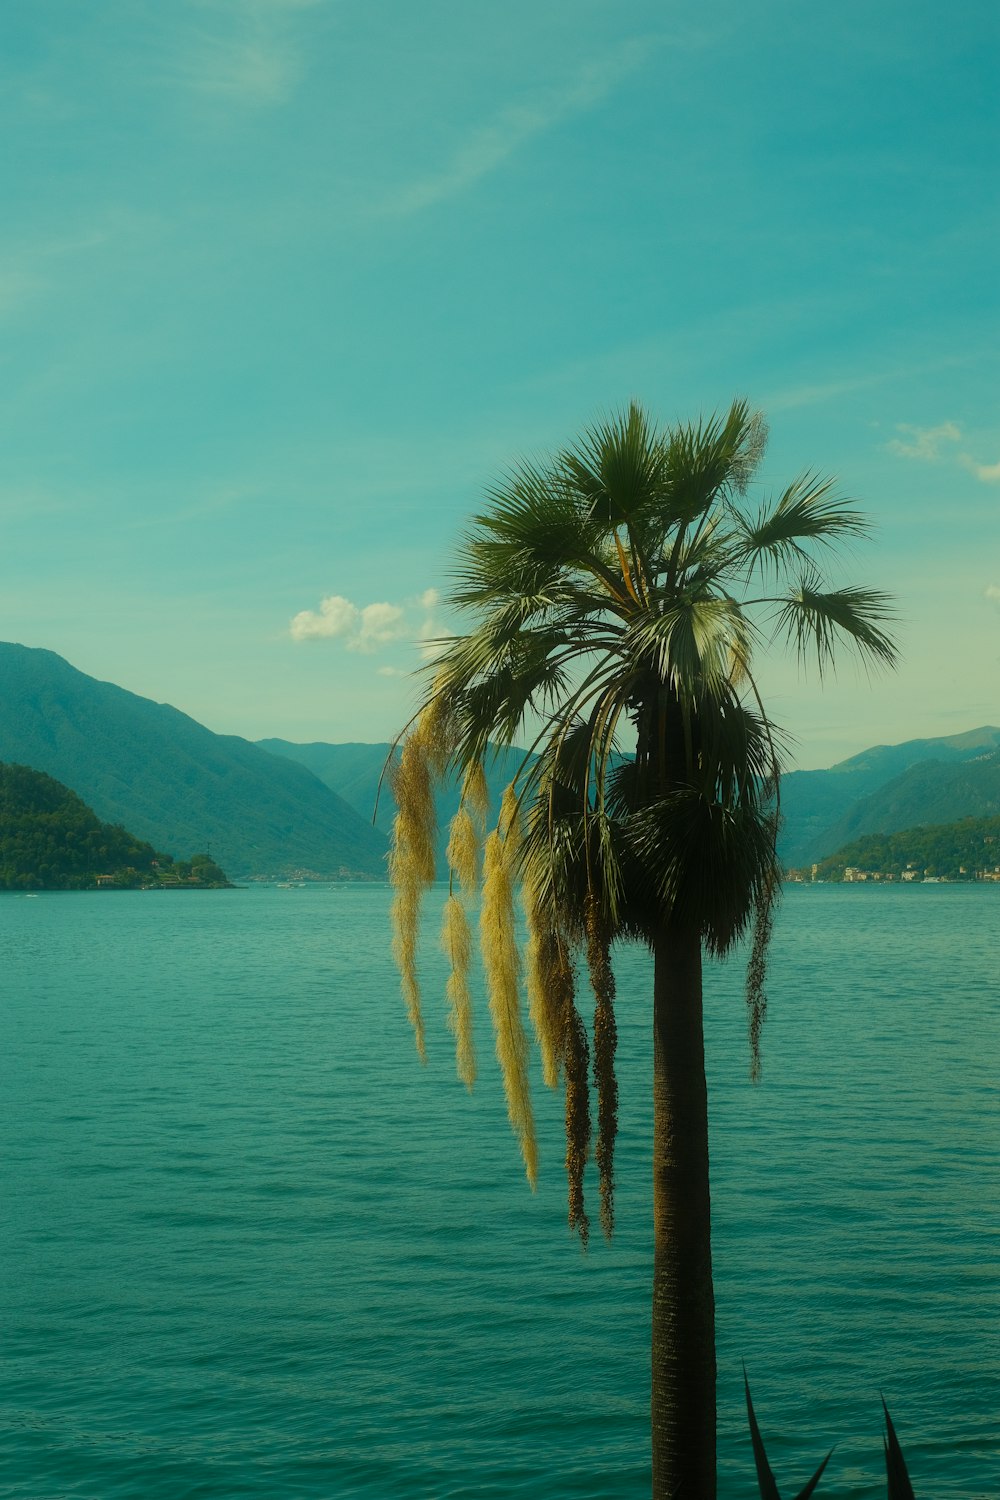 a palm tree on the edge of a body of water